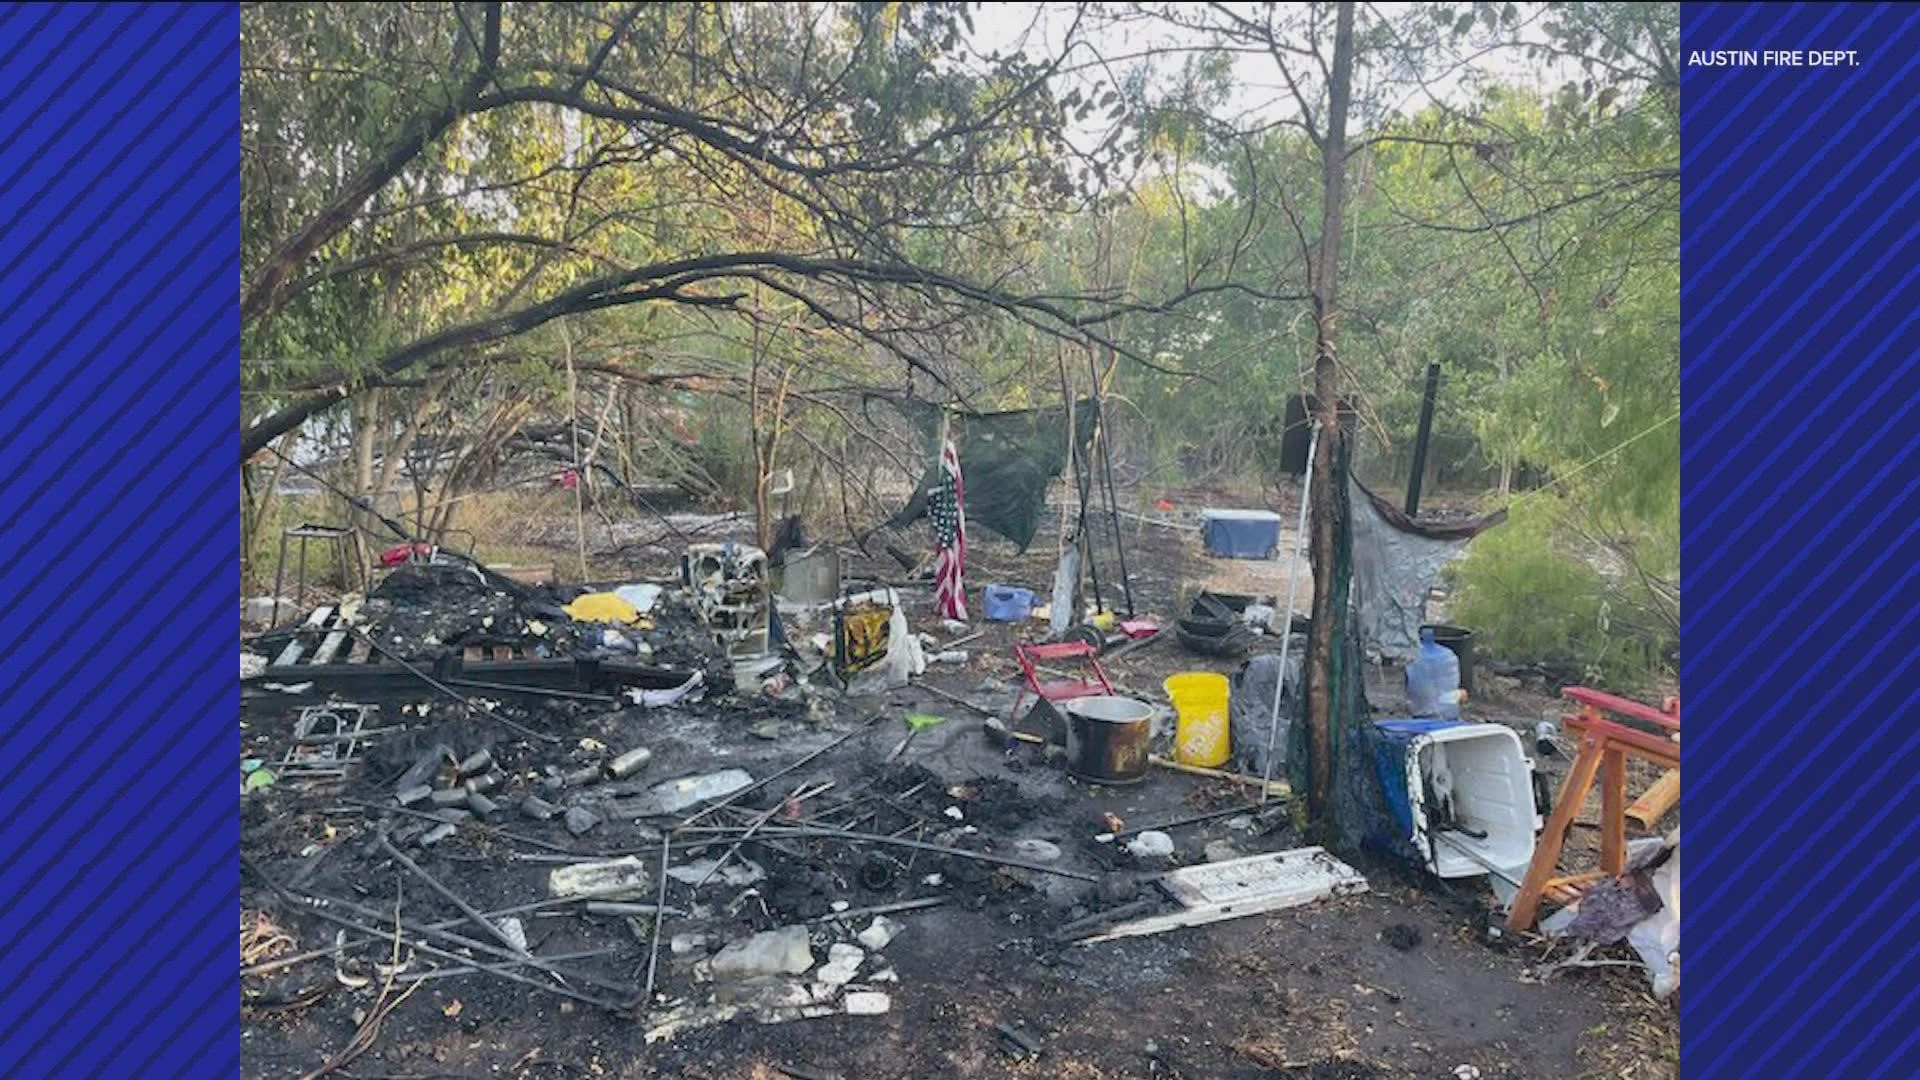 A fire in a South Austin neighborhood spread to propane tanks at an encampment in the woods late Monday night.